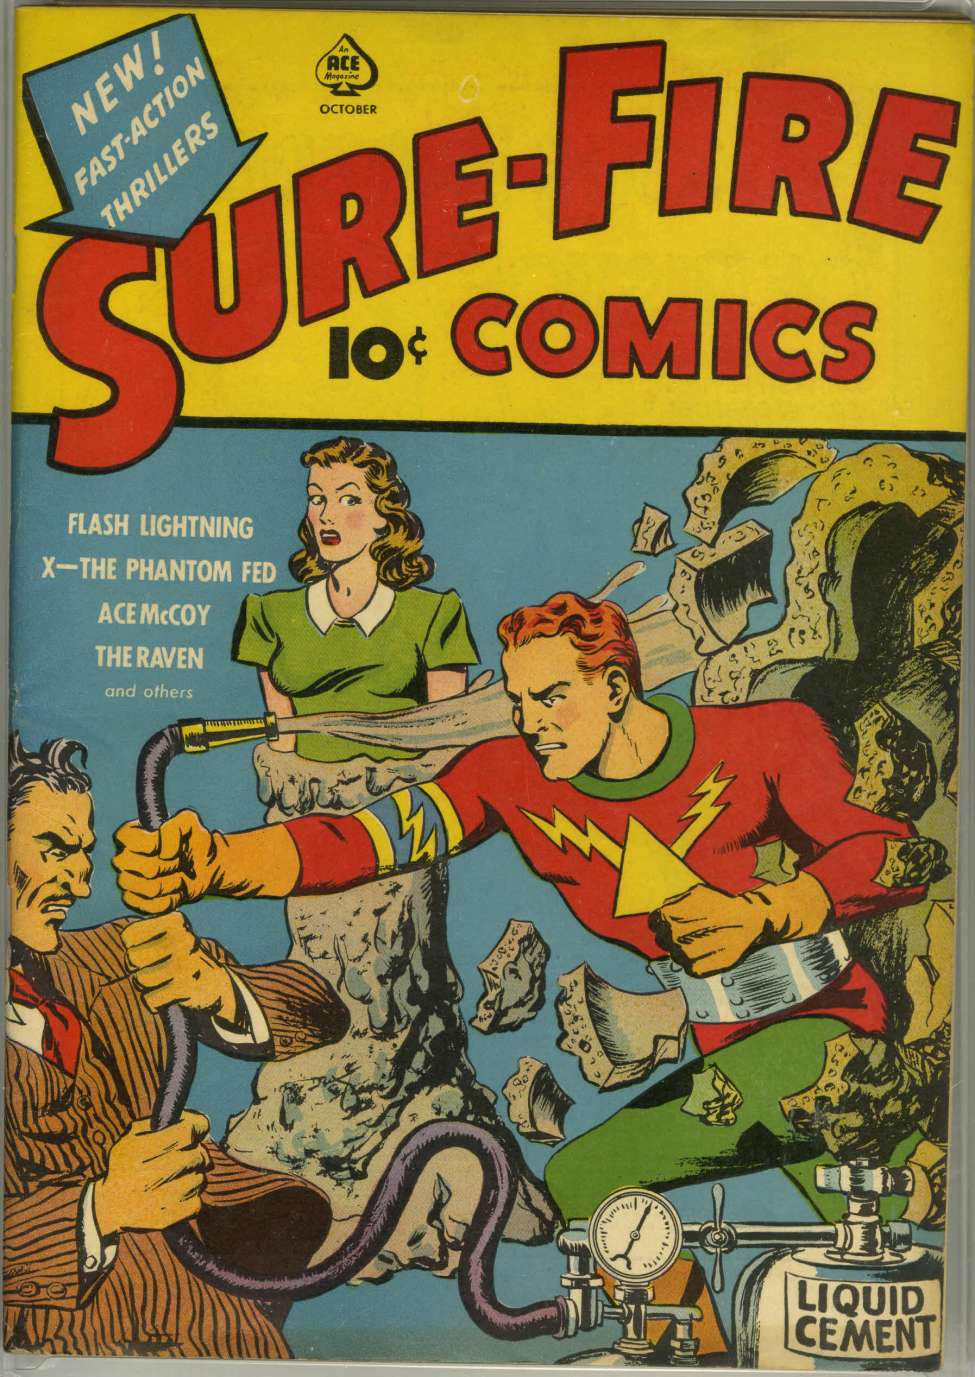 Book Cover For Sure-Fire Comics 3b